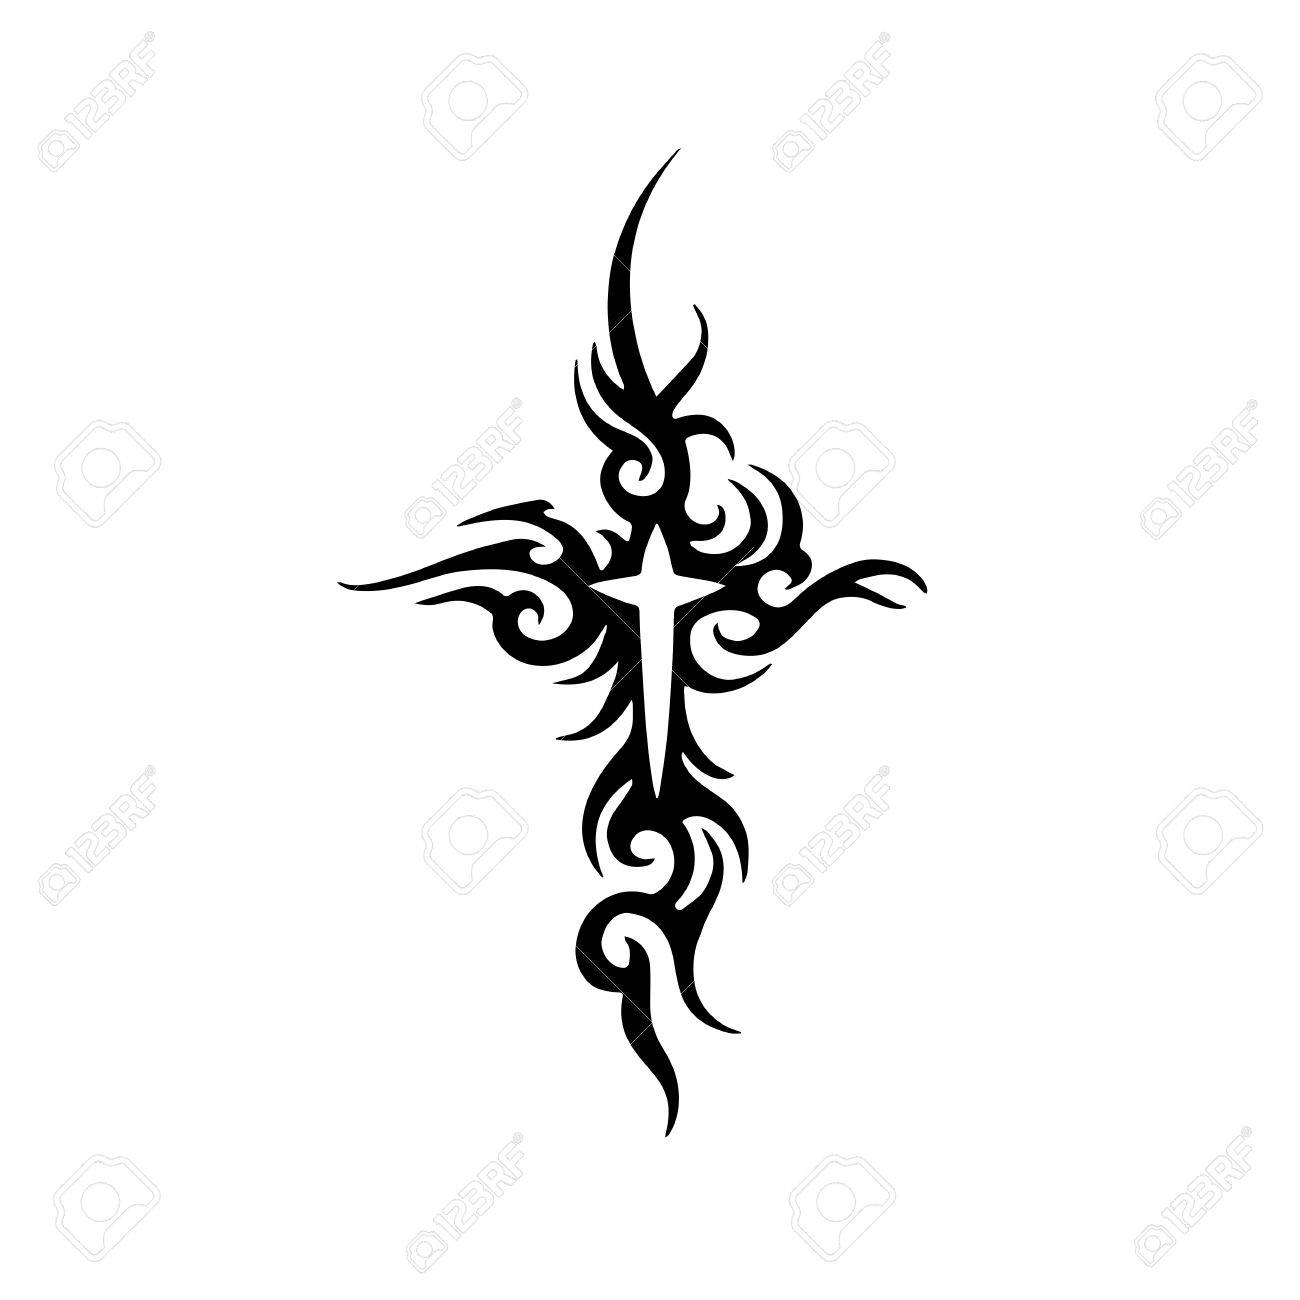 Tribal Cross Tattoo Design Royalty Free Cliparts Vectors And Stock regarding size 1300 X 1300